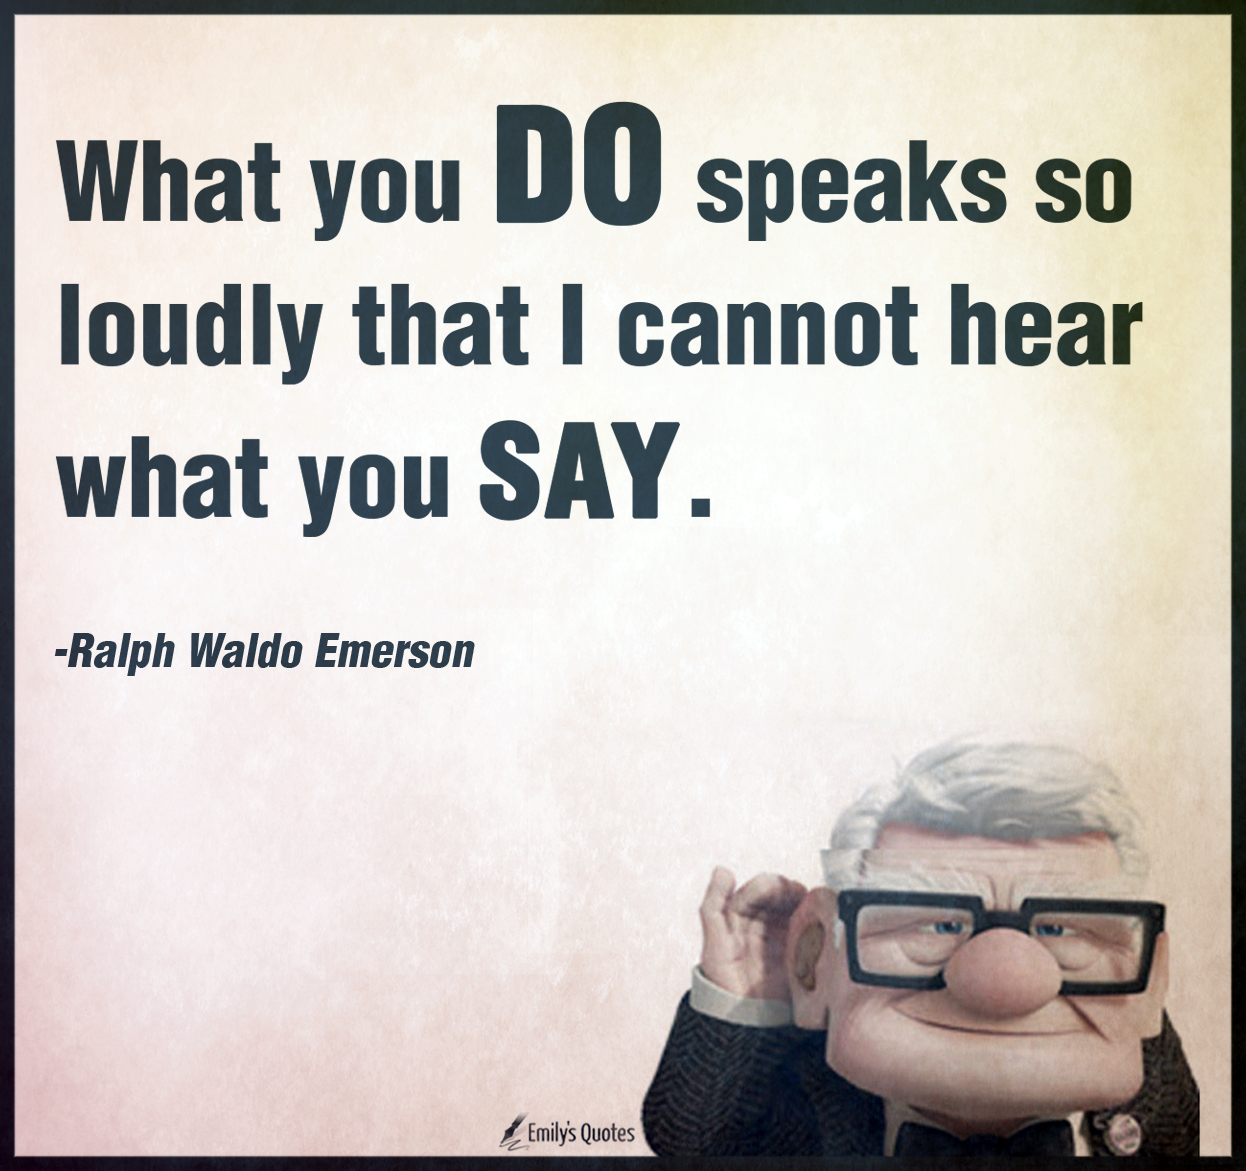 What you do speaks so loudly that I cannot hear what you say